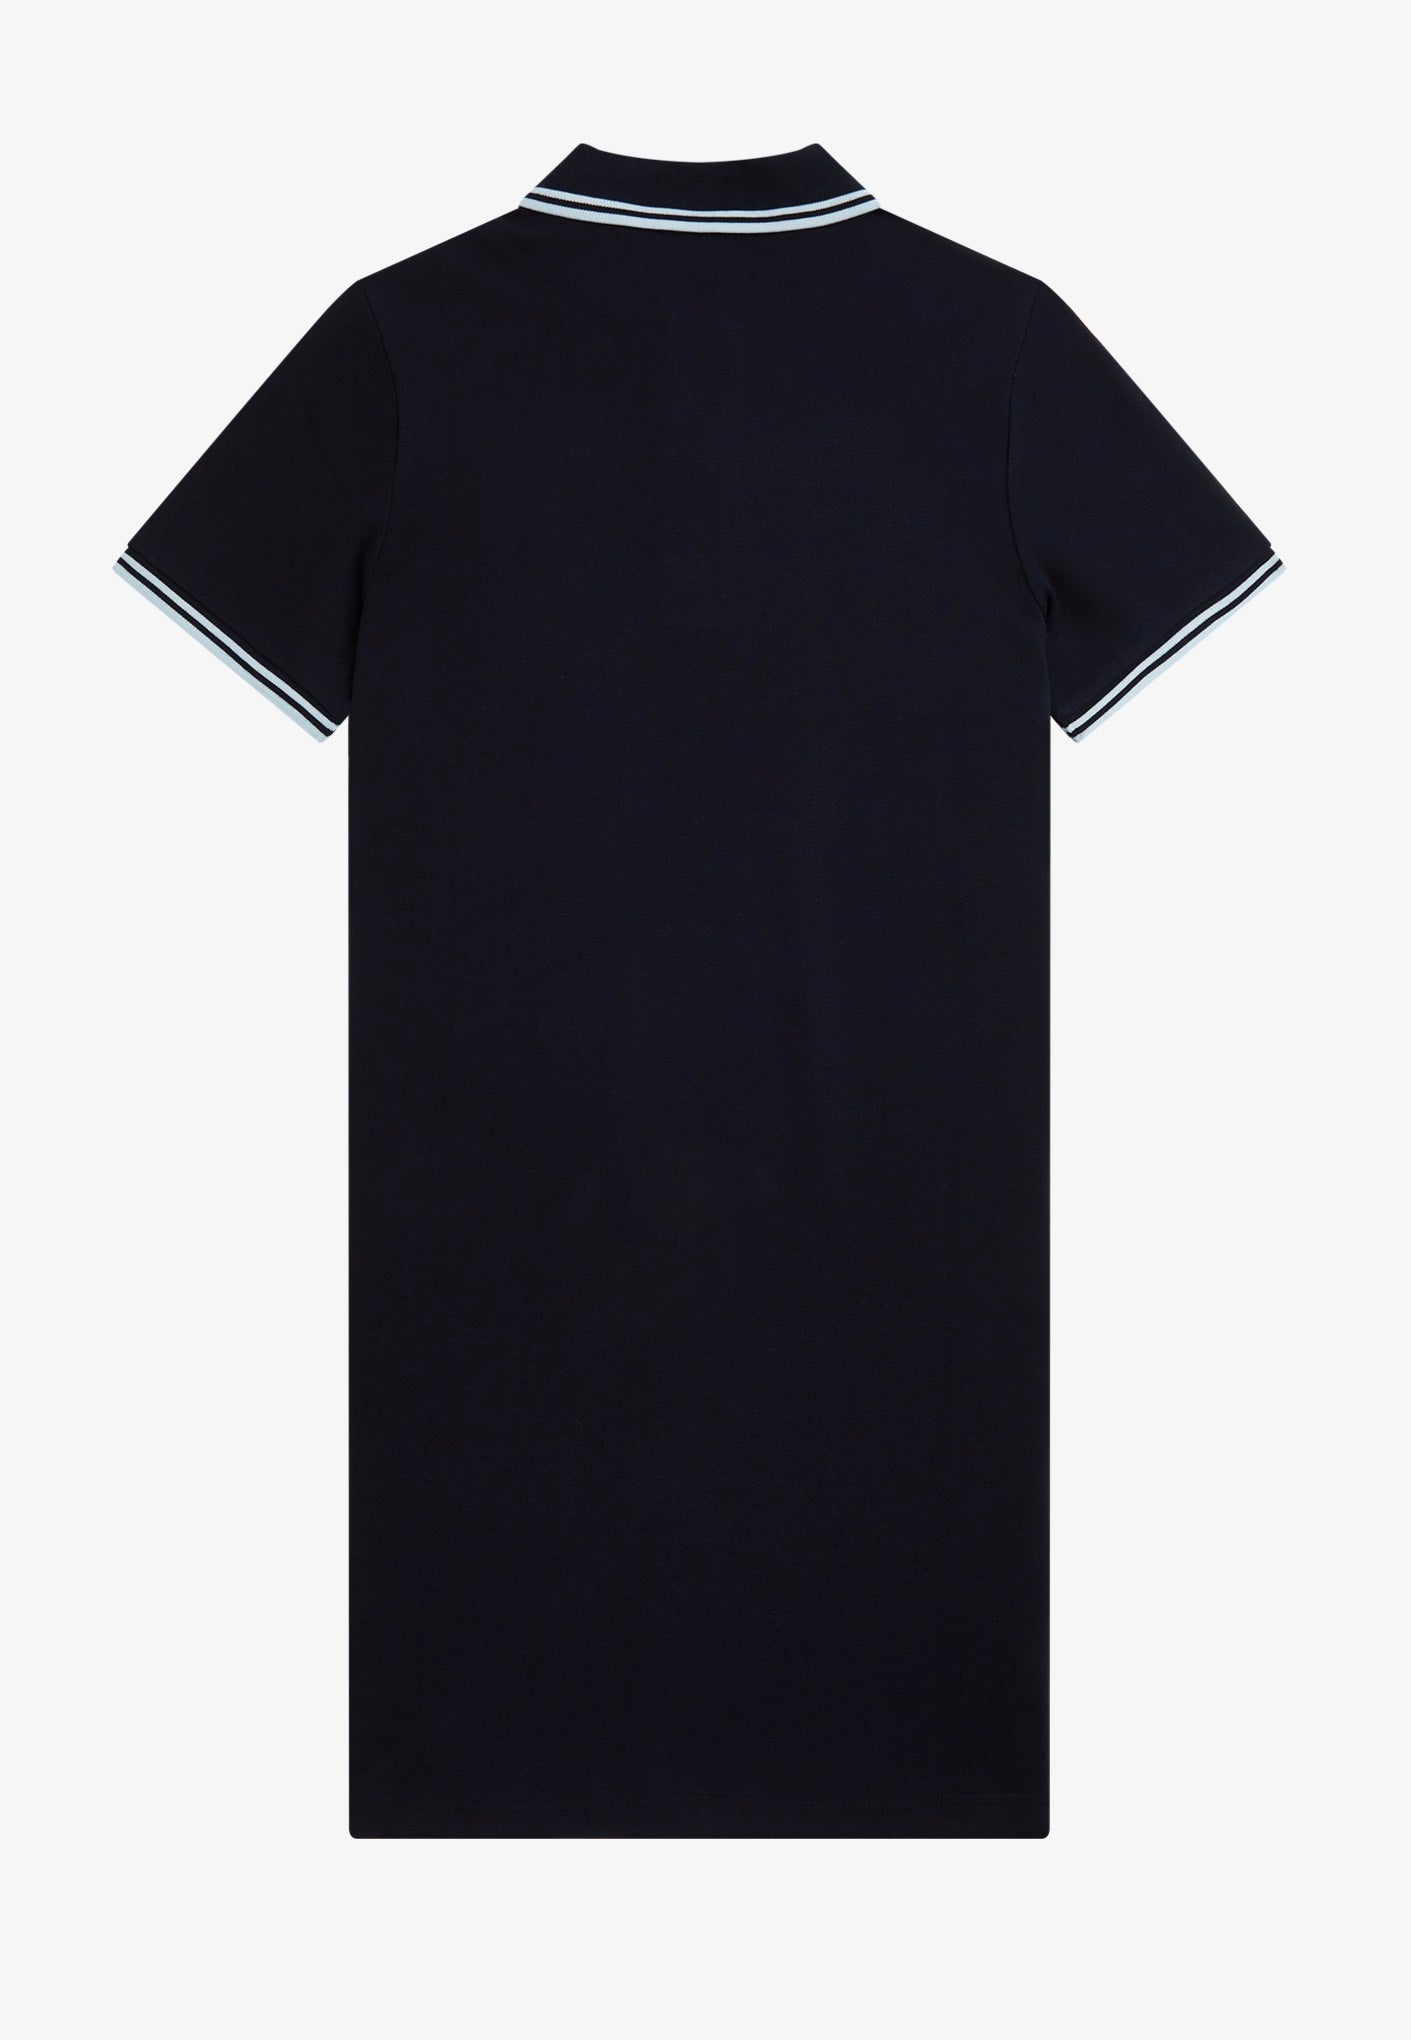 Fred Perry - Twin Tipped Navy - Dress | Women-Image